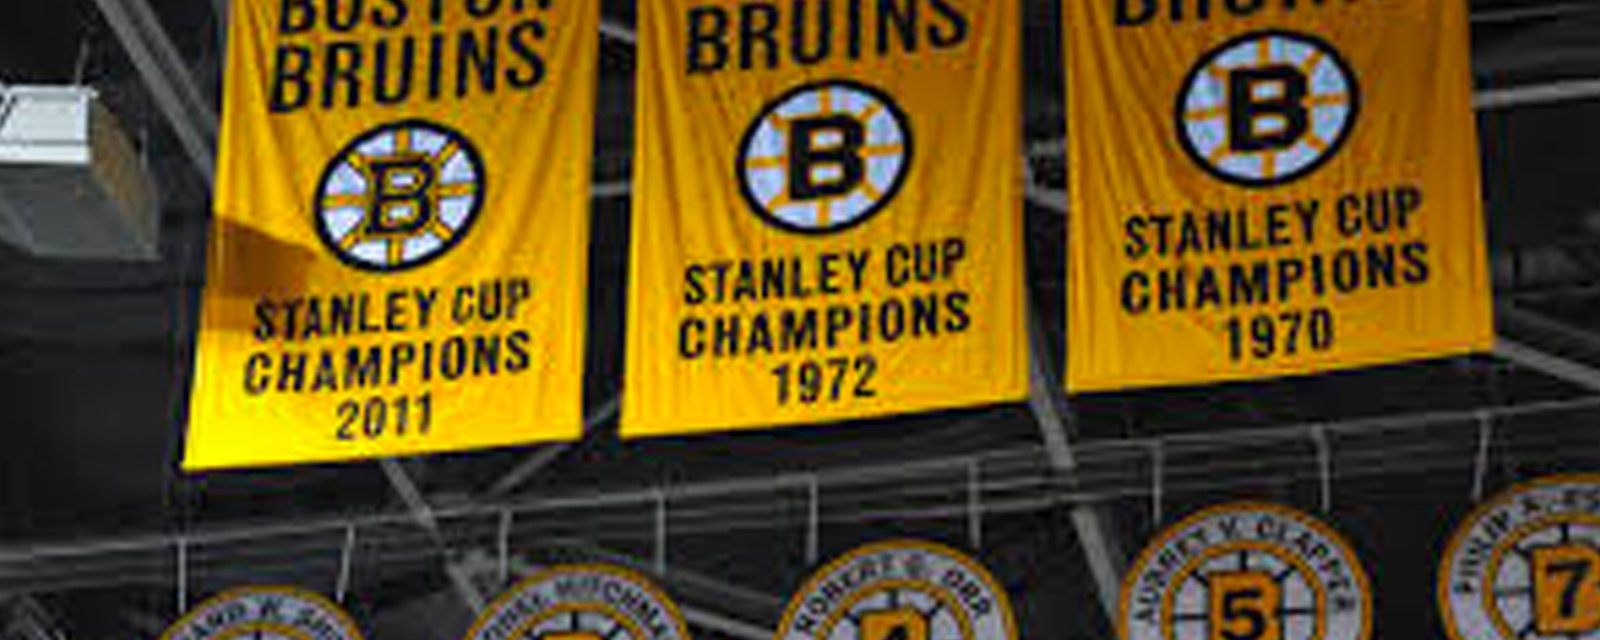 Bruins announce that a new jersey number will hang from the rafters at TD Garden